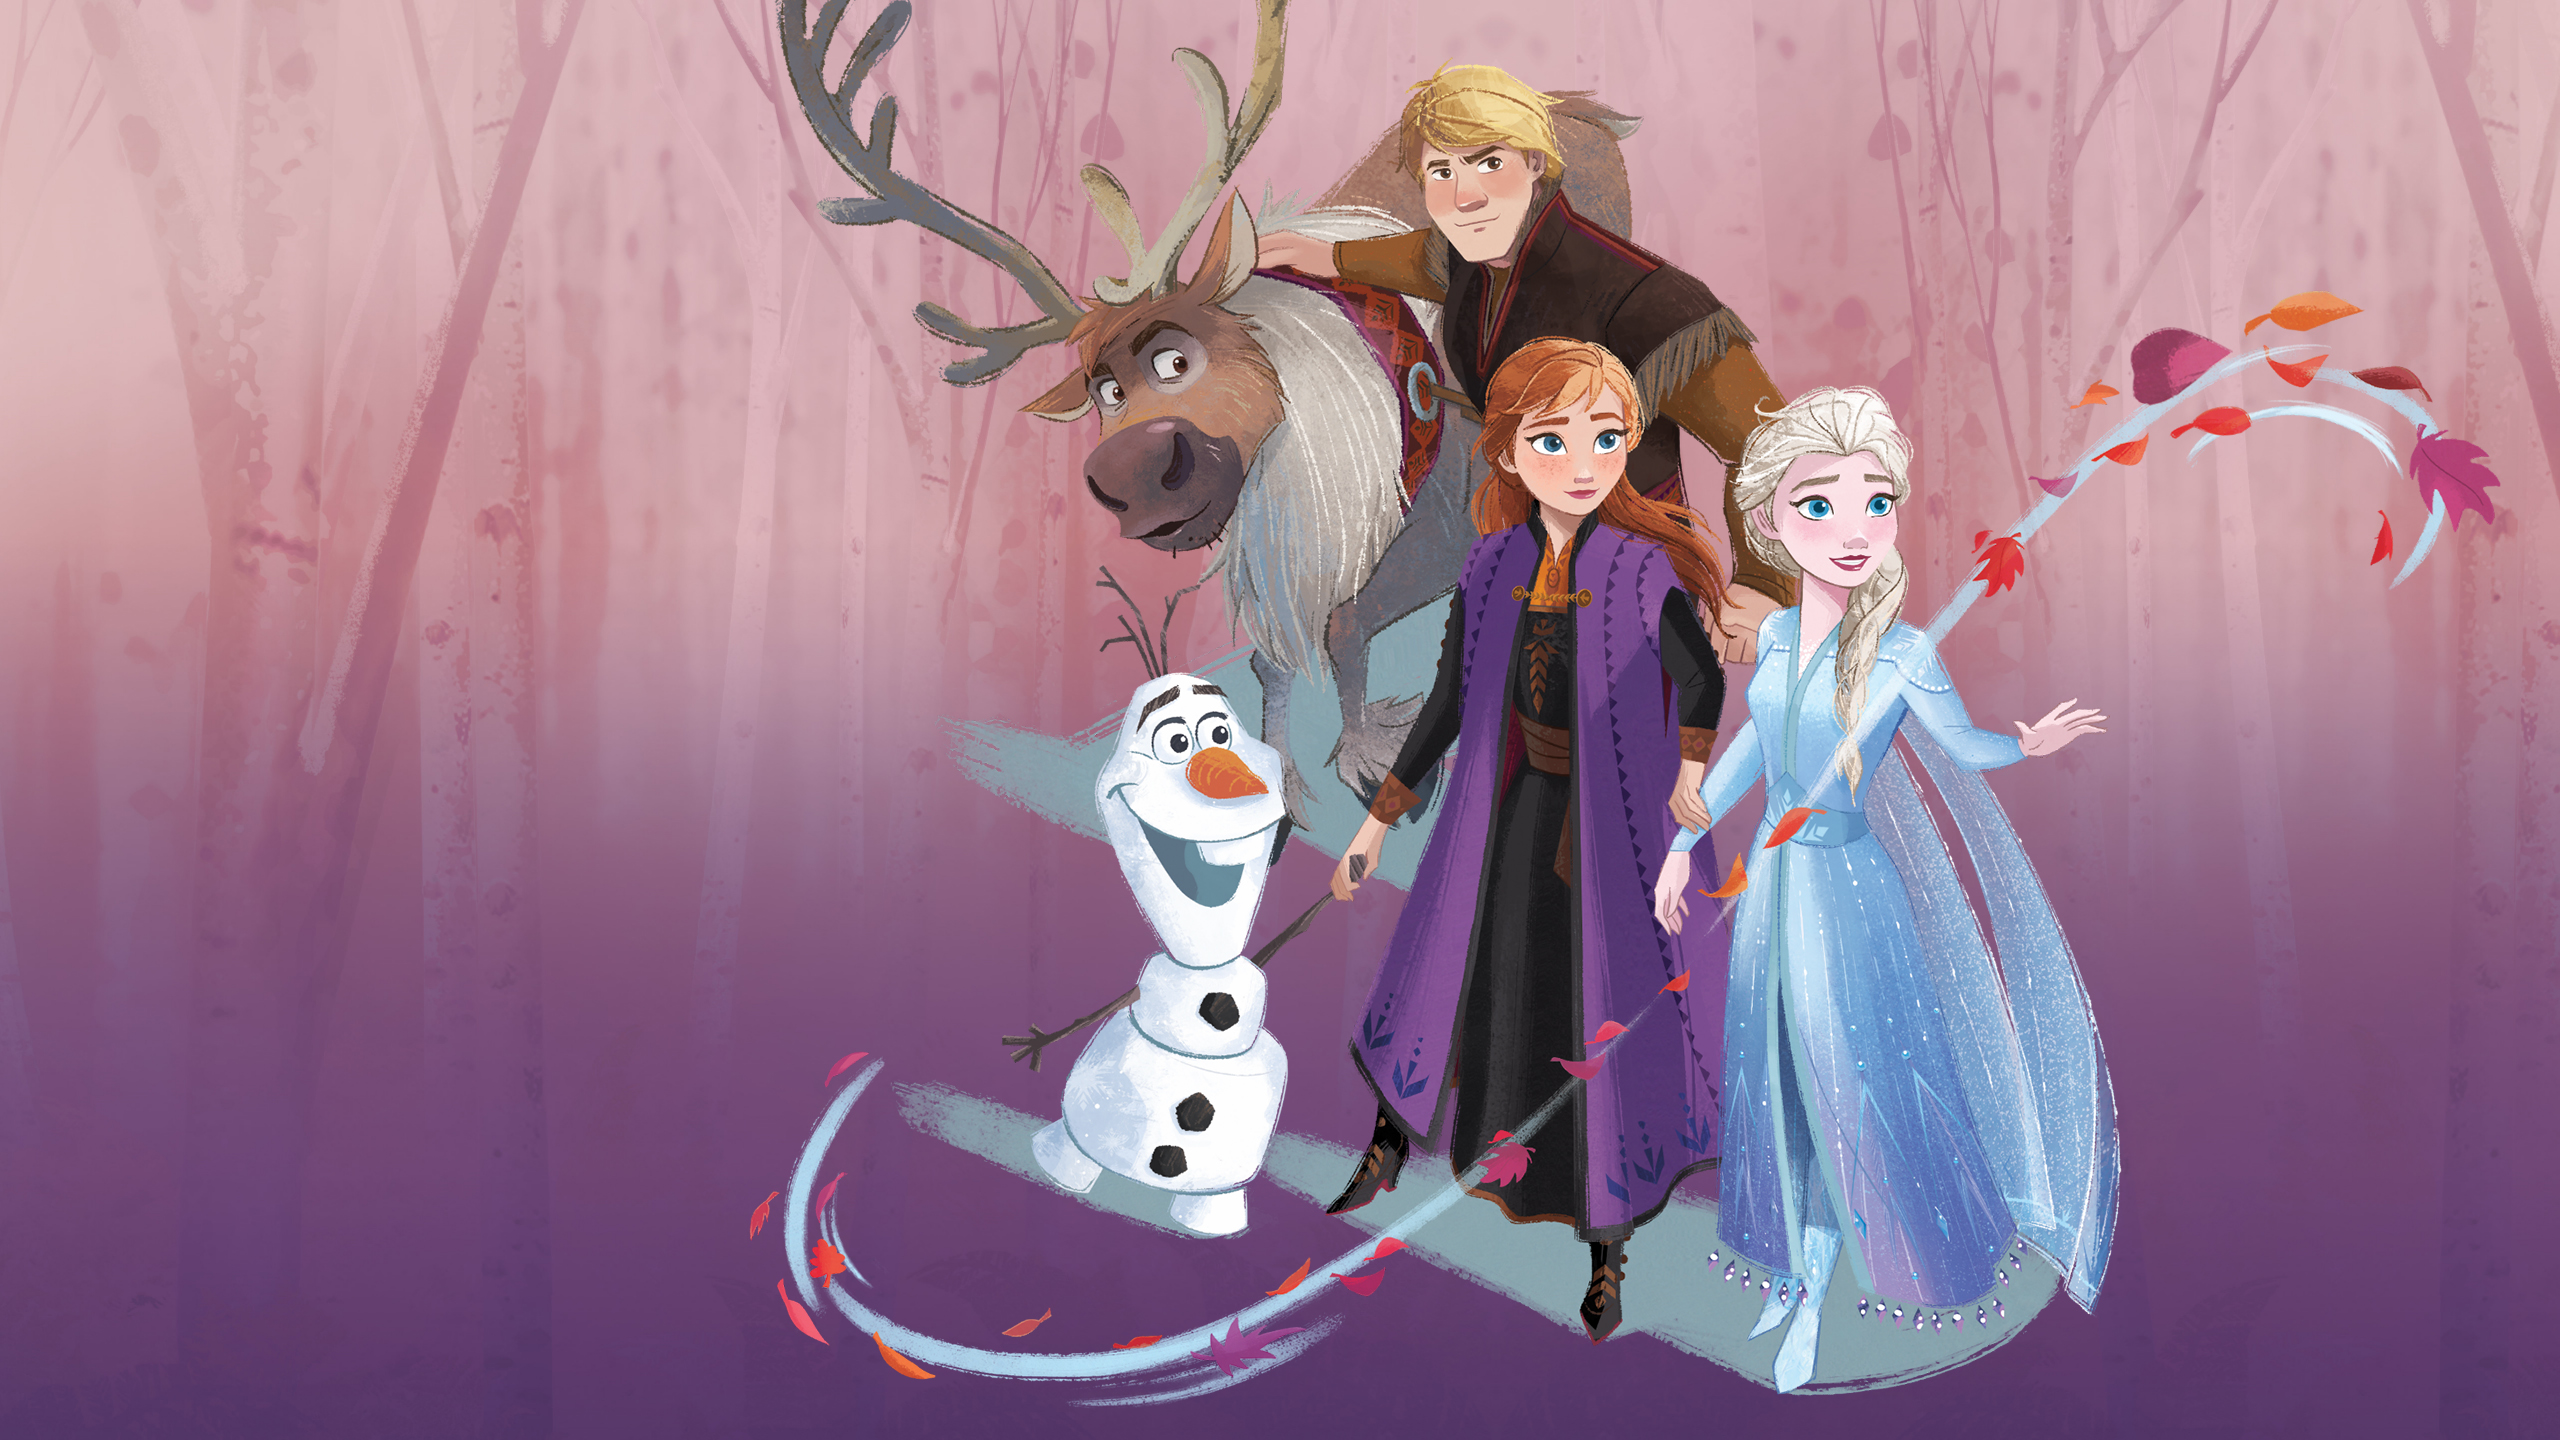 There are wallpapers with Elsa, Anna, Olaf and one group wallpaper with all...